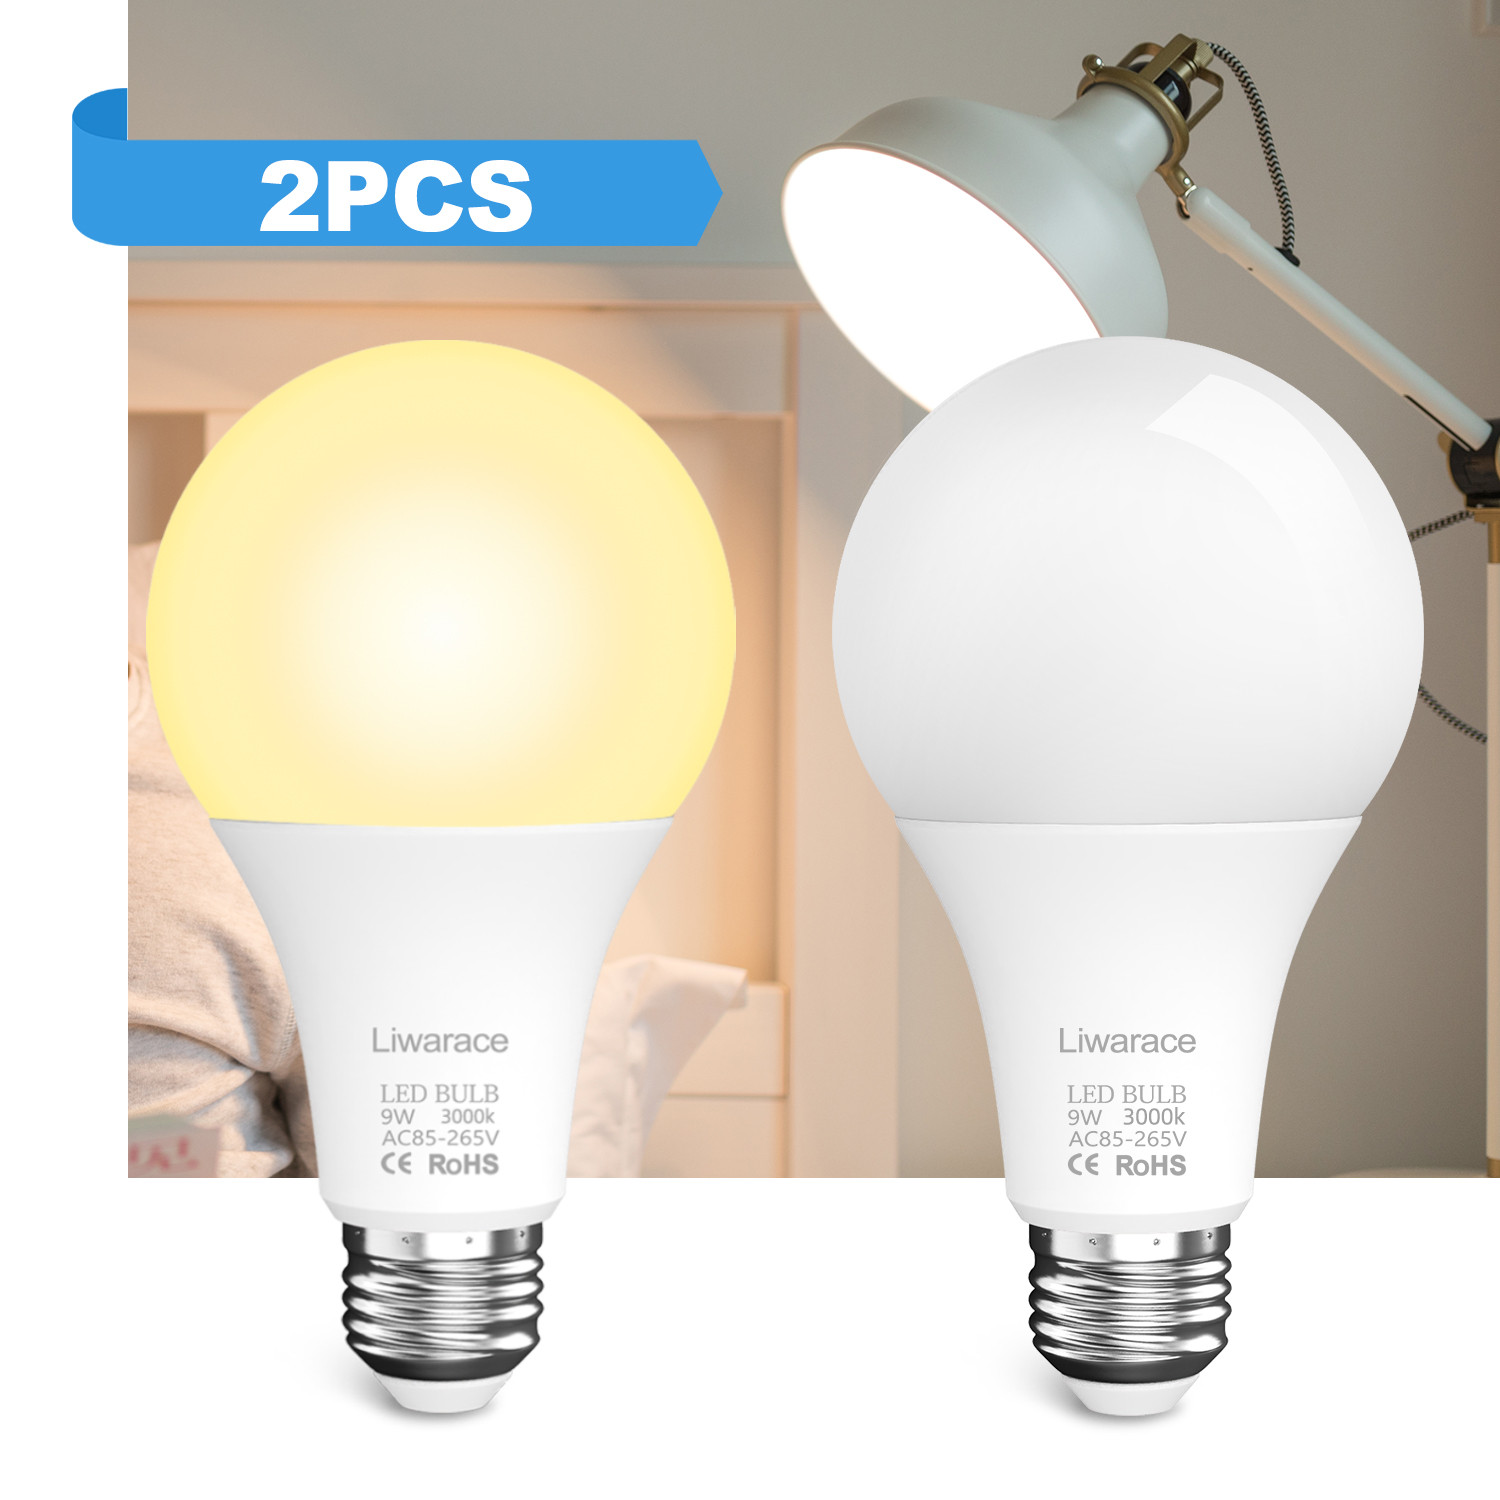 Htwon 2PCS A21 LED Bulb 180 Watt Equivalent with E26/E27 Screw Port, Super  Bright Light Bulb, Warm White 3000K, Non-Dimmable, for Indoor  Outdoor  Lighting